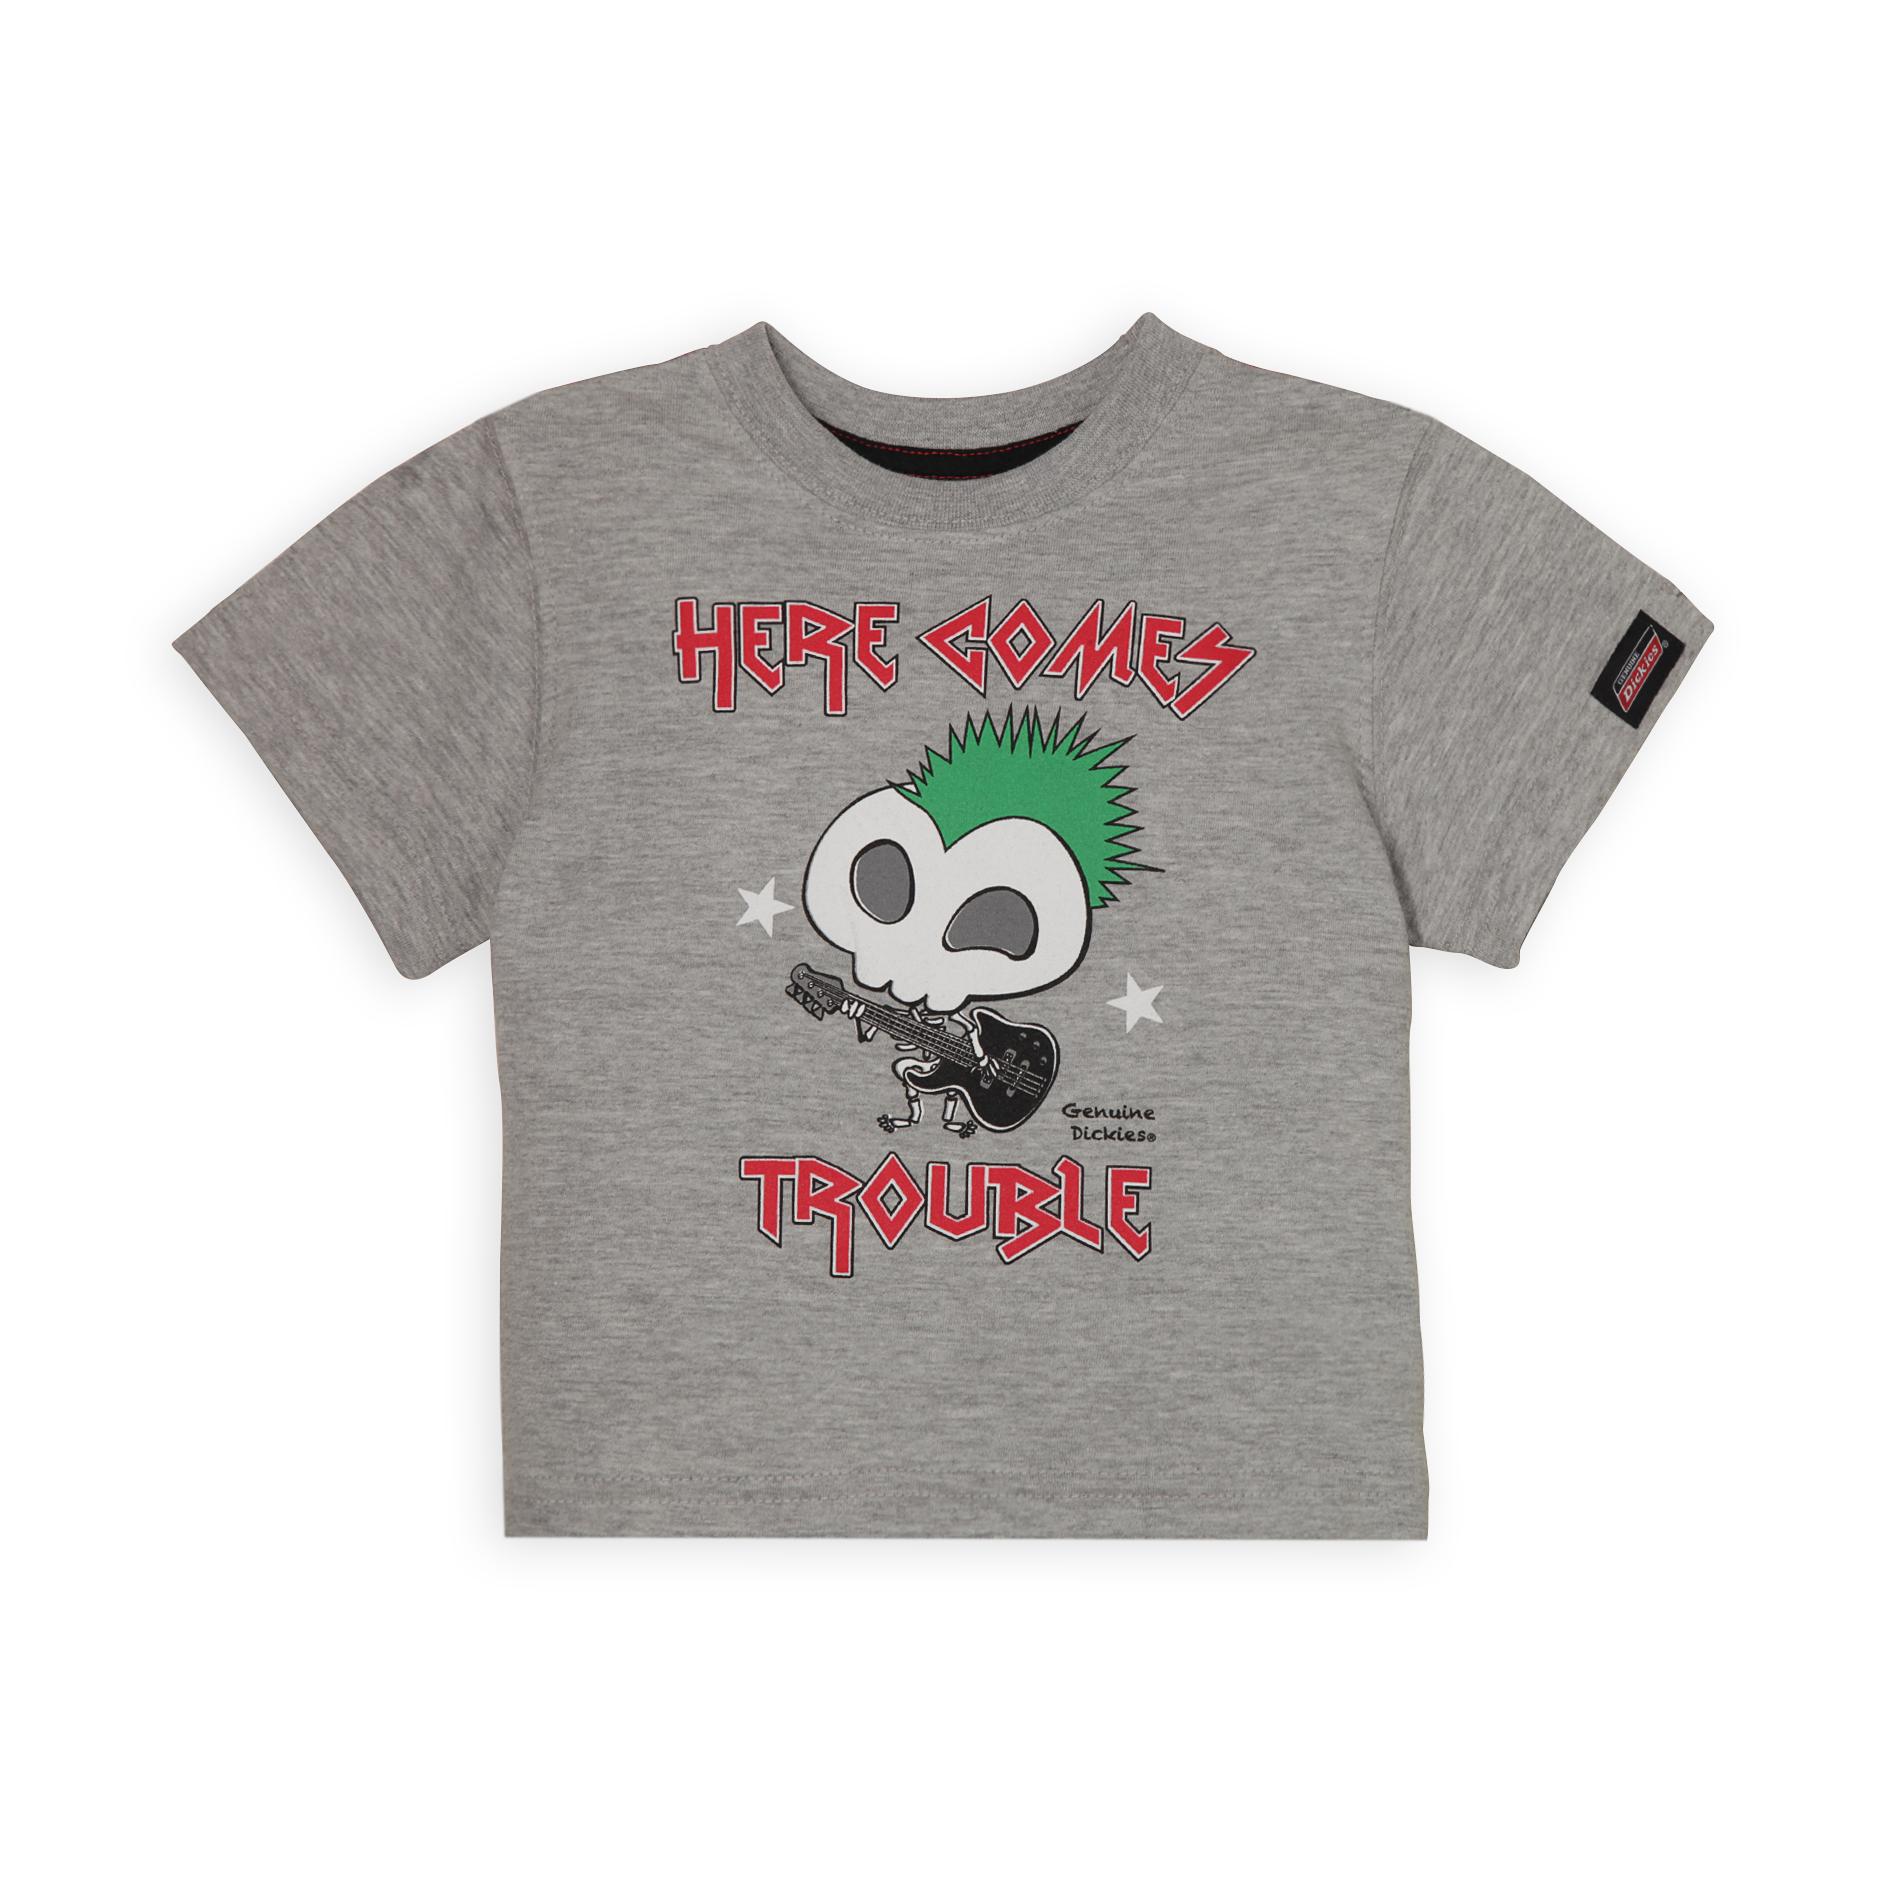 Dickies Infant & Toddler Boy's Graphic T-Shirt - Here Comes Trouble